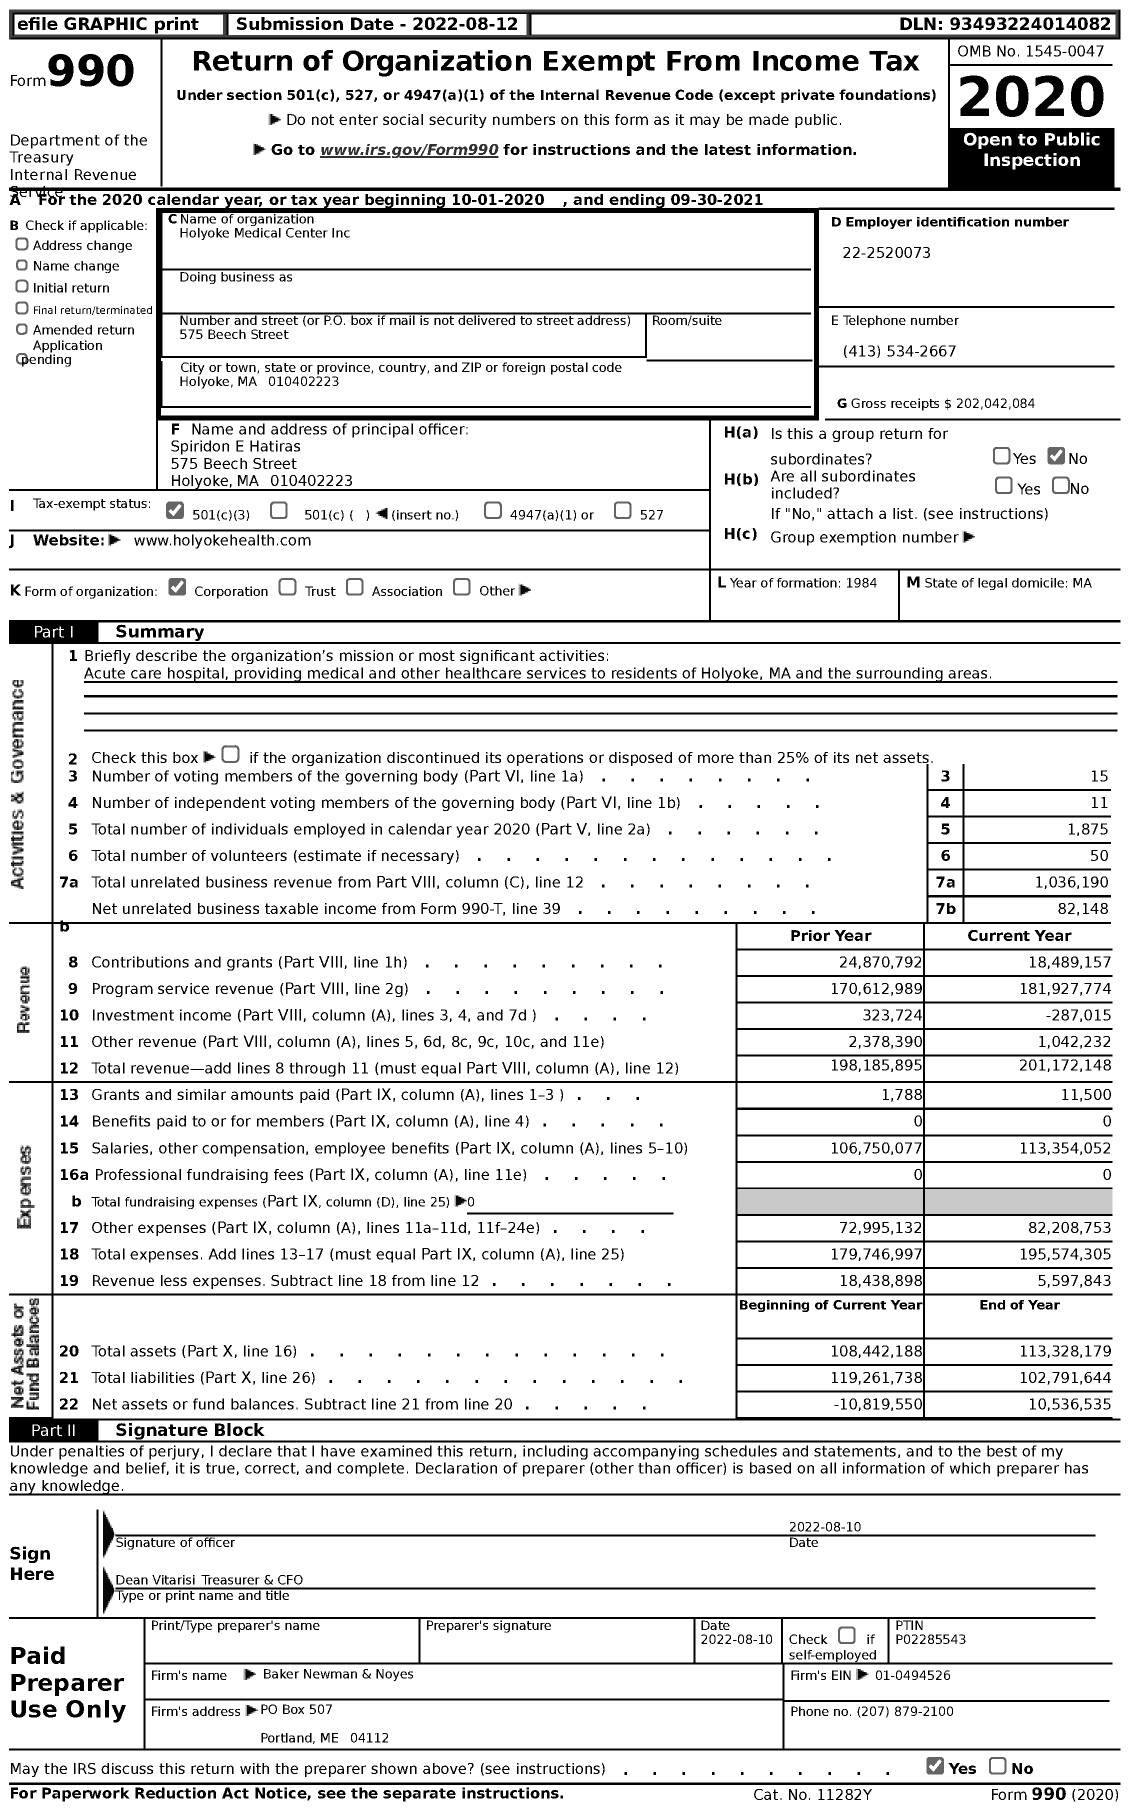 Image of first page of 2020 Form 990 for Holyoke Medical Center (HMC)